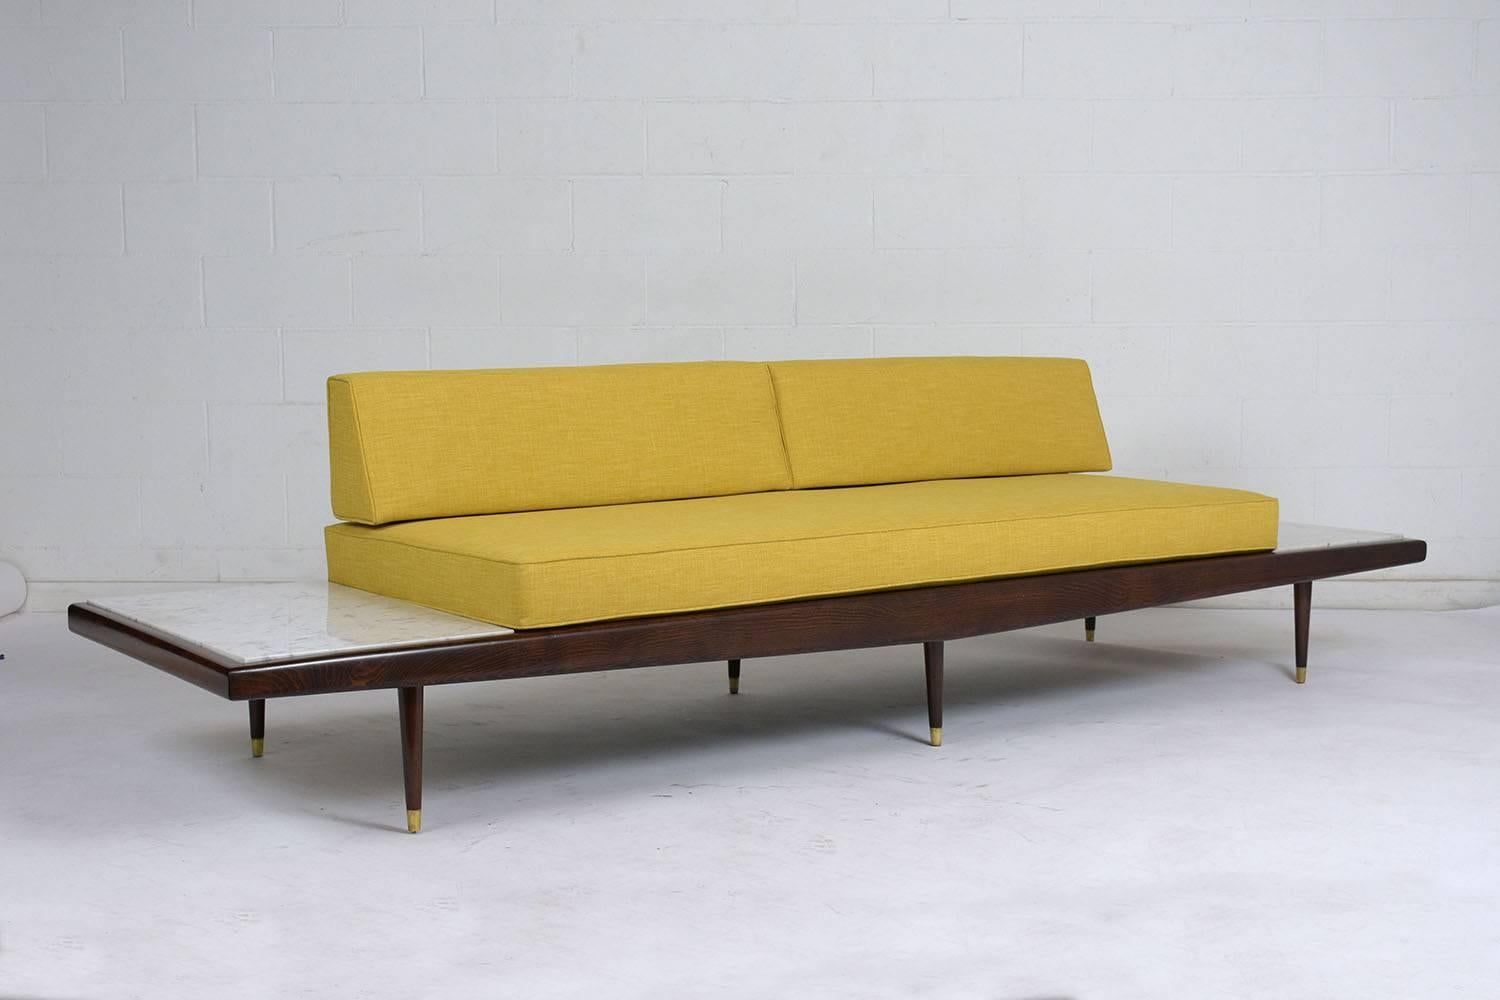 This 1960s Mid-Century Modern sofa is designed by Adrian Pearsall for Craft Associates. The boomerang style wood frame is stained a rich walnut color with a lacquered finish. Extending from the ends of the cushion are built in side tables with